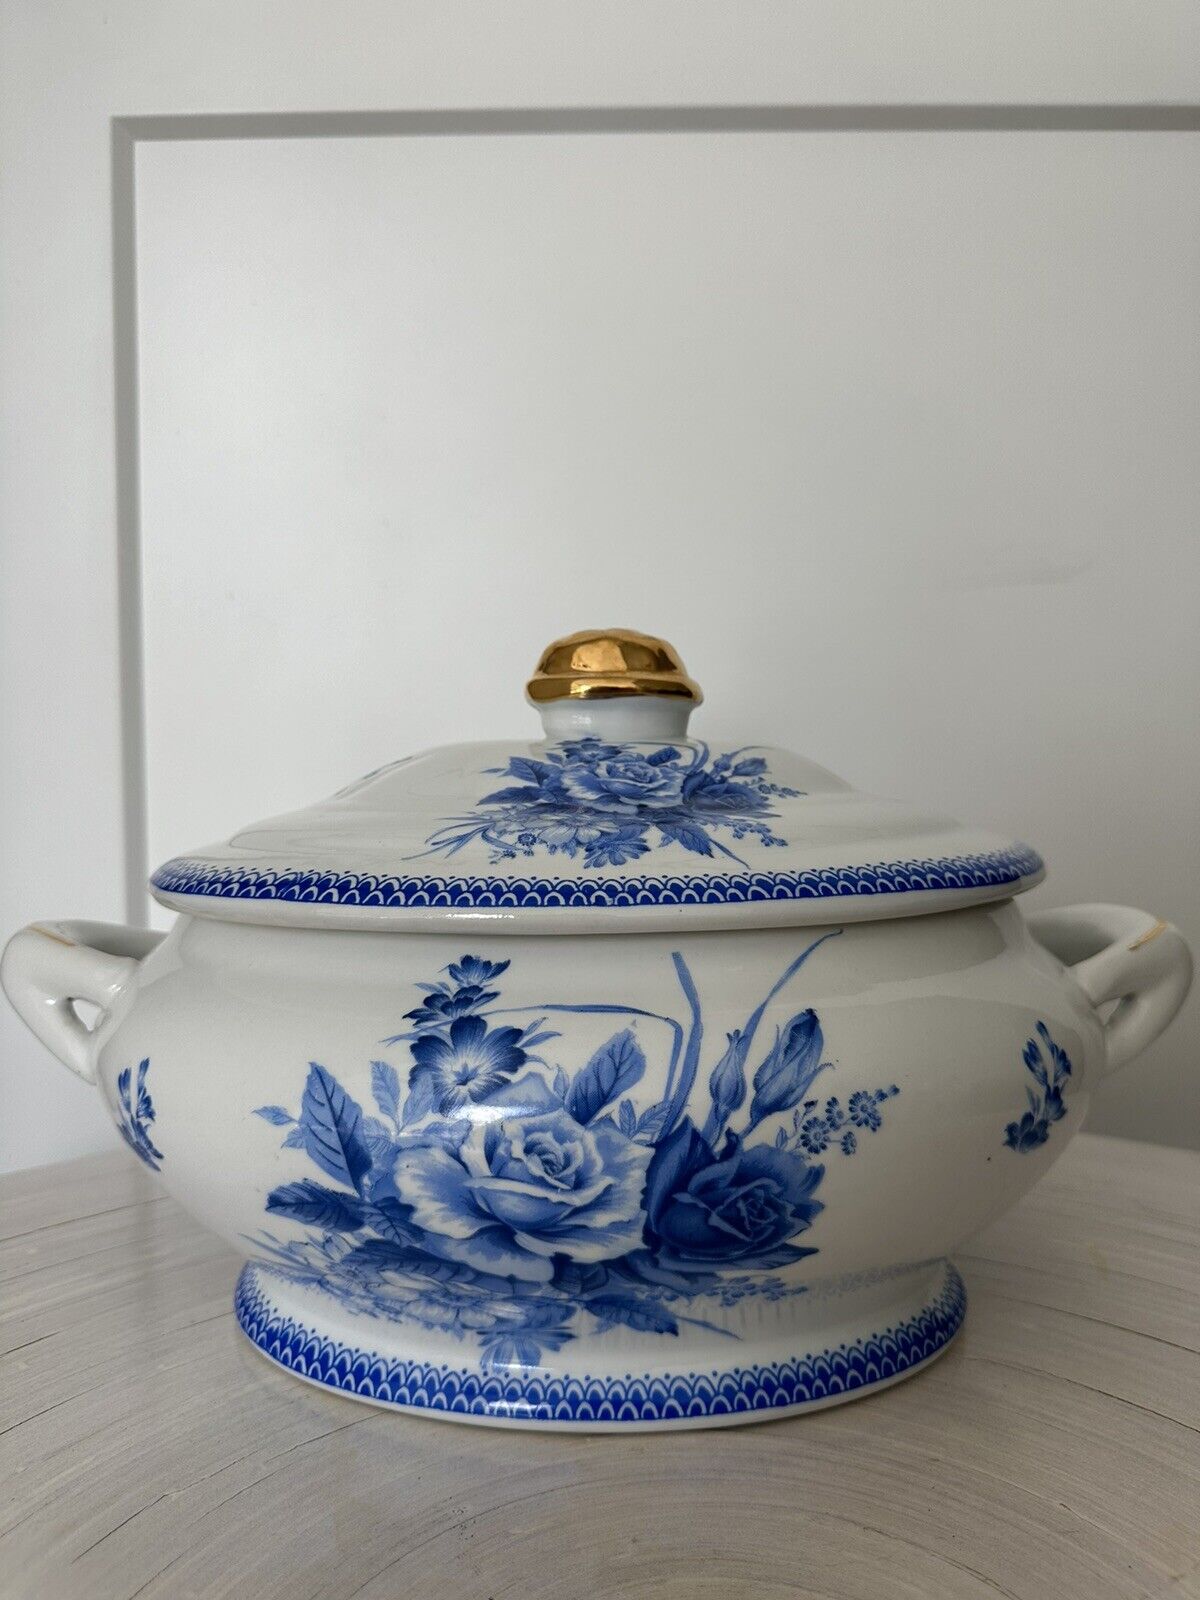 ~Chinese Blue and White Porcelain Tureen and Cover  ~Gold Gilt ~RARE ~Exquisite